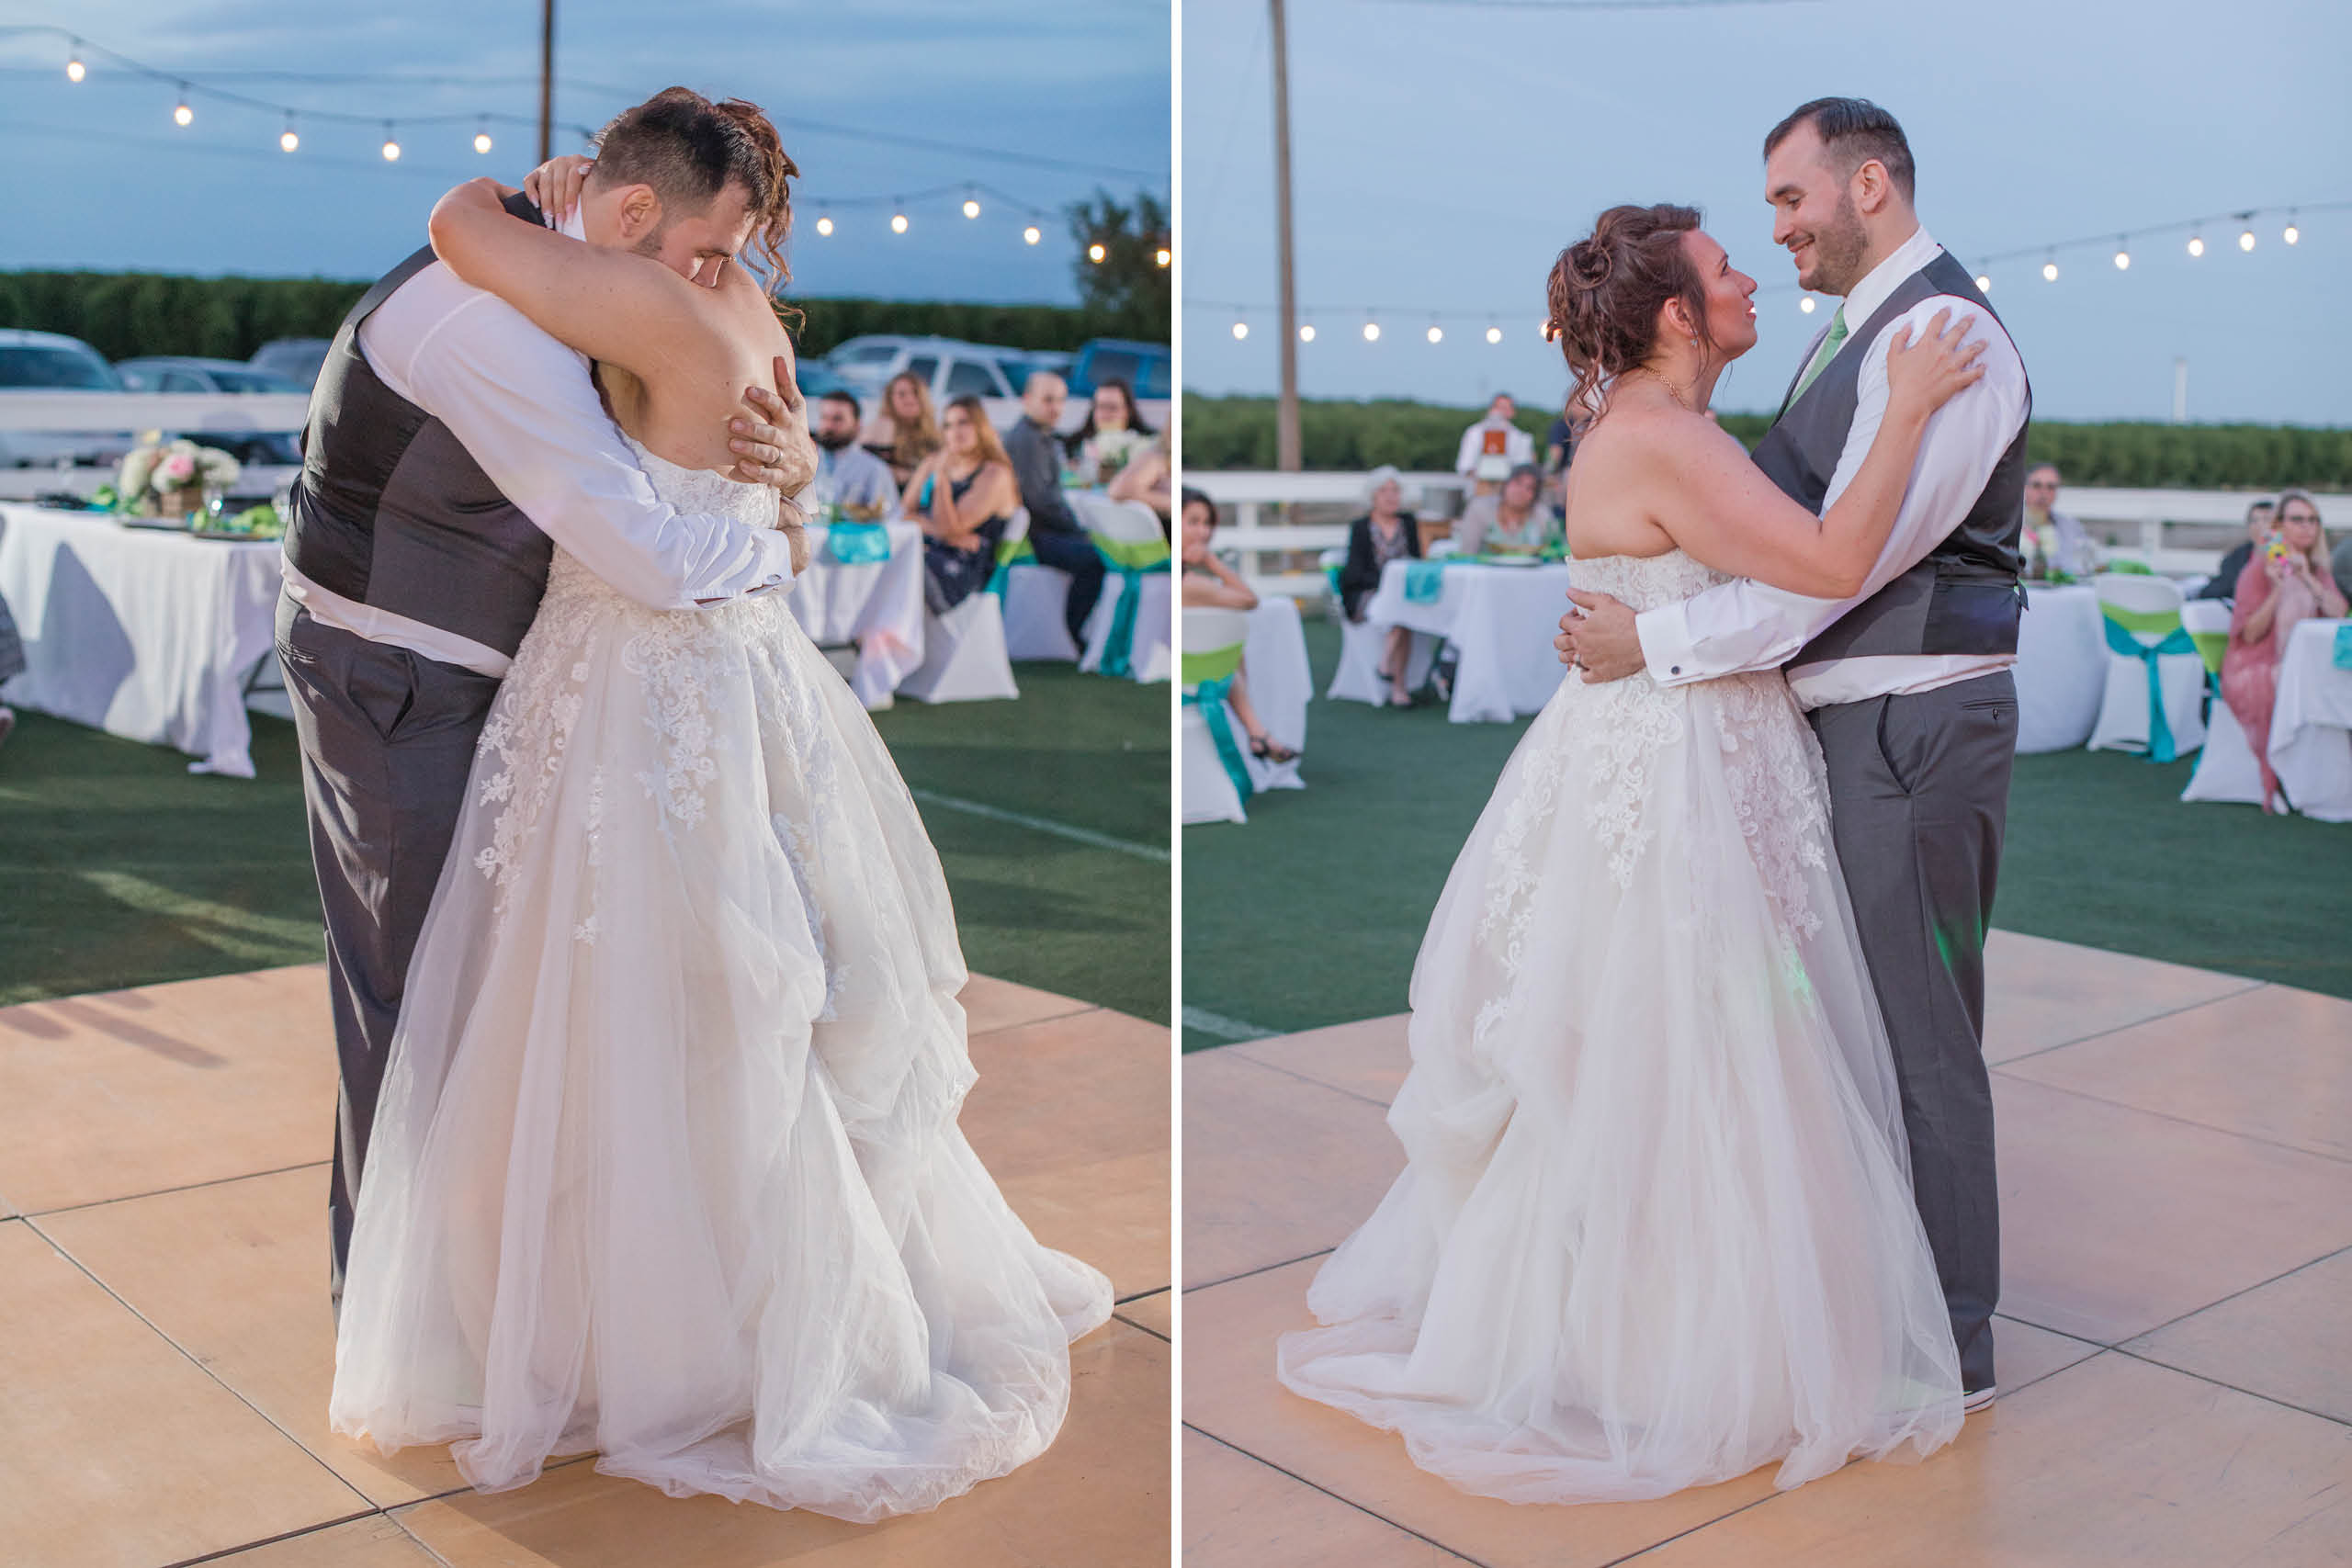 A teal Branch and Vine Wedding first dance